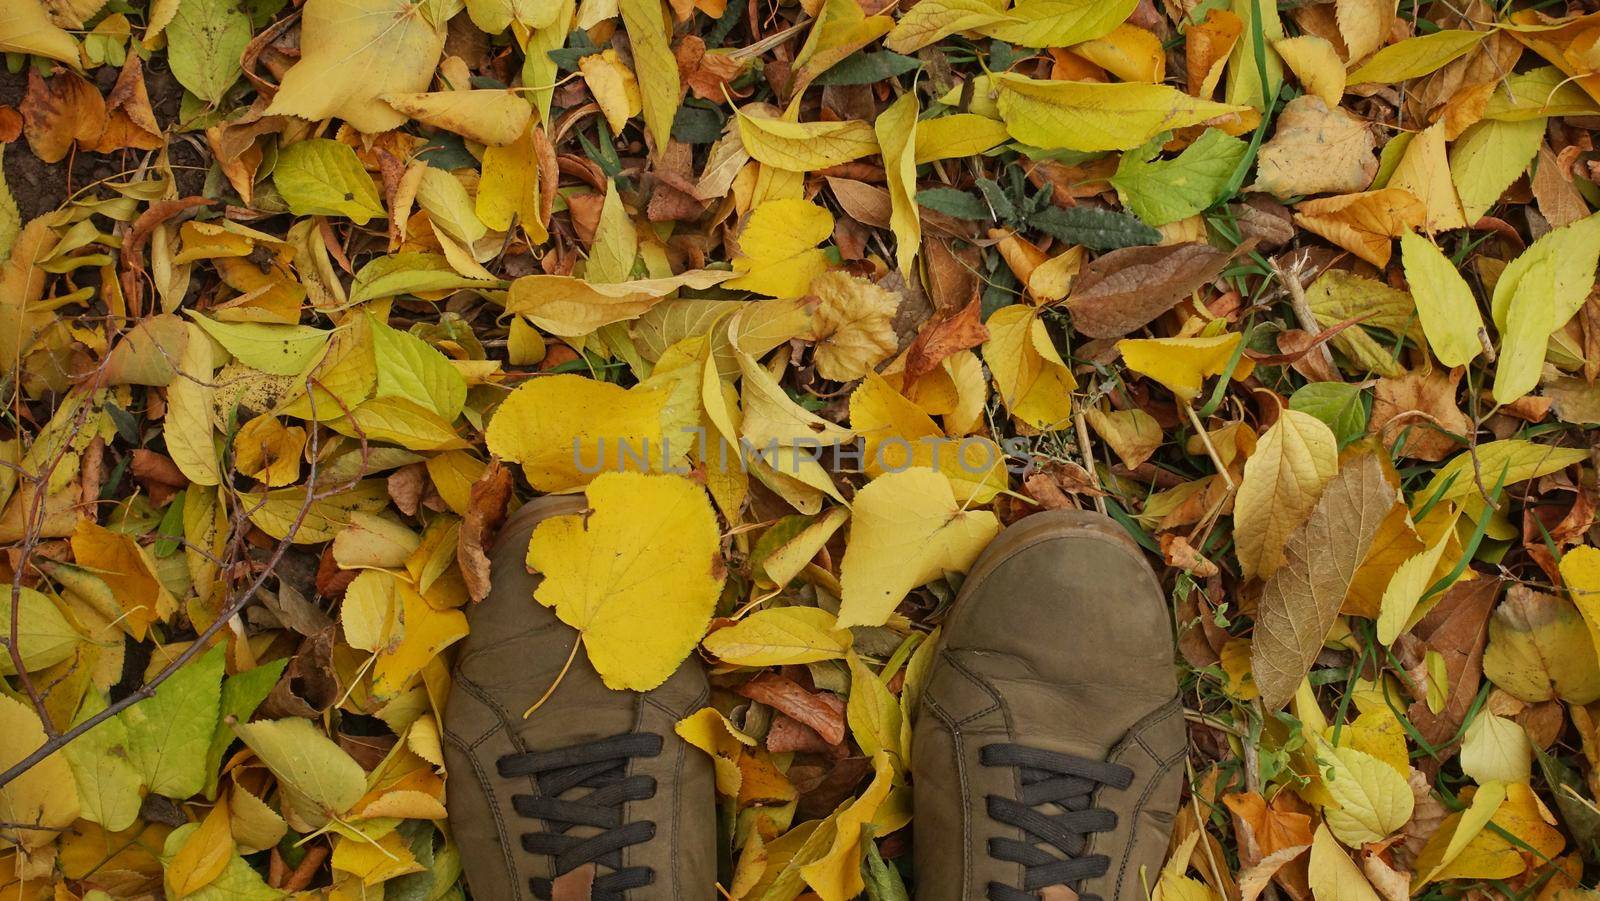 A man stood in shoes on the autumn foliage from a fallen tree in the park. Walk in the autumn park.